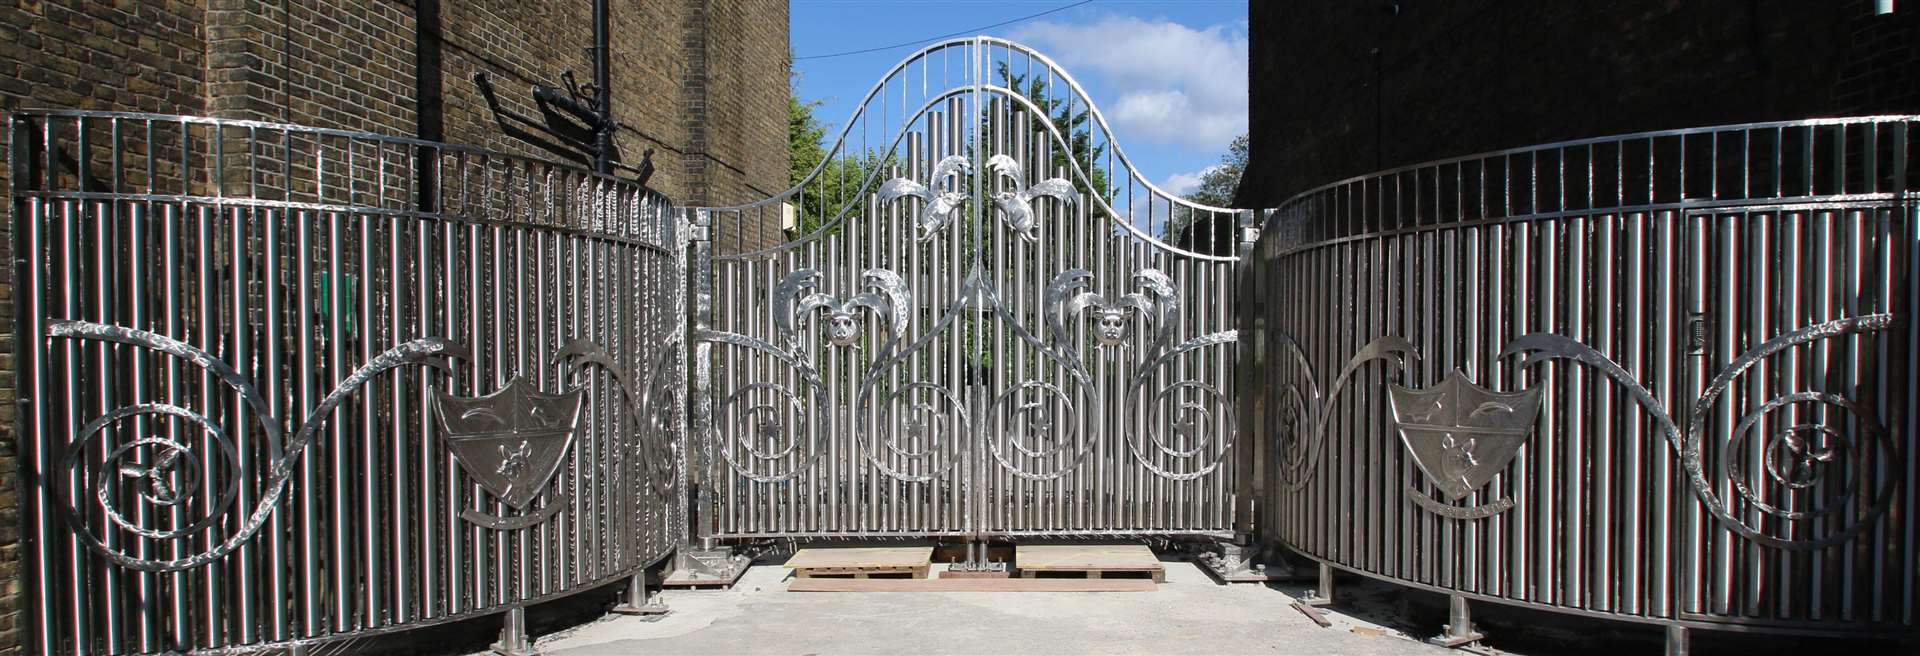 The steel musical gates at Rochester Independent College